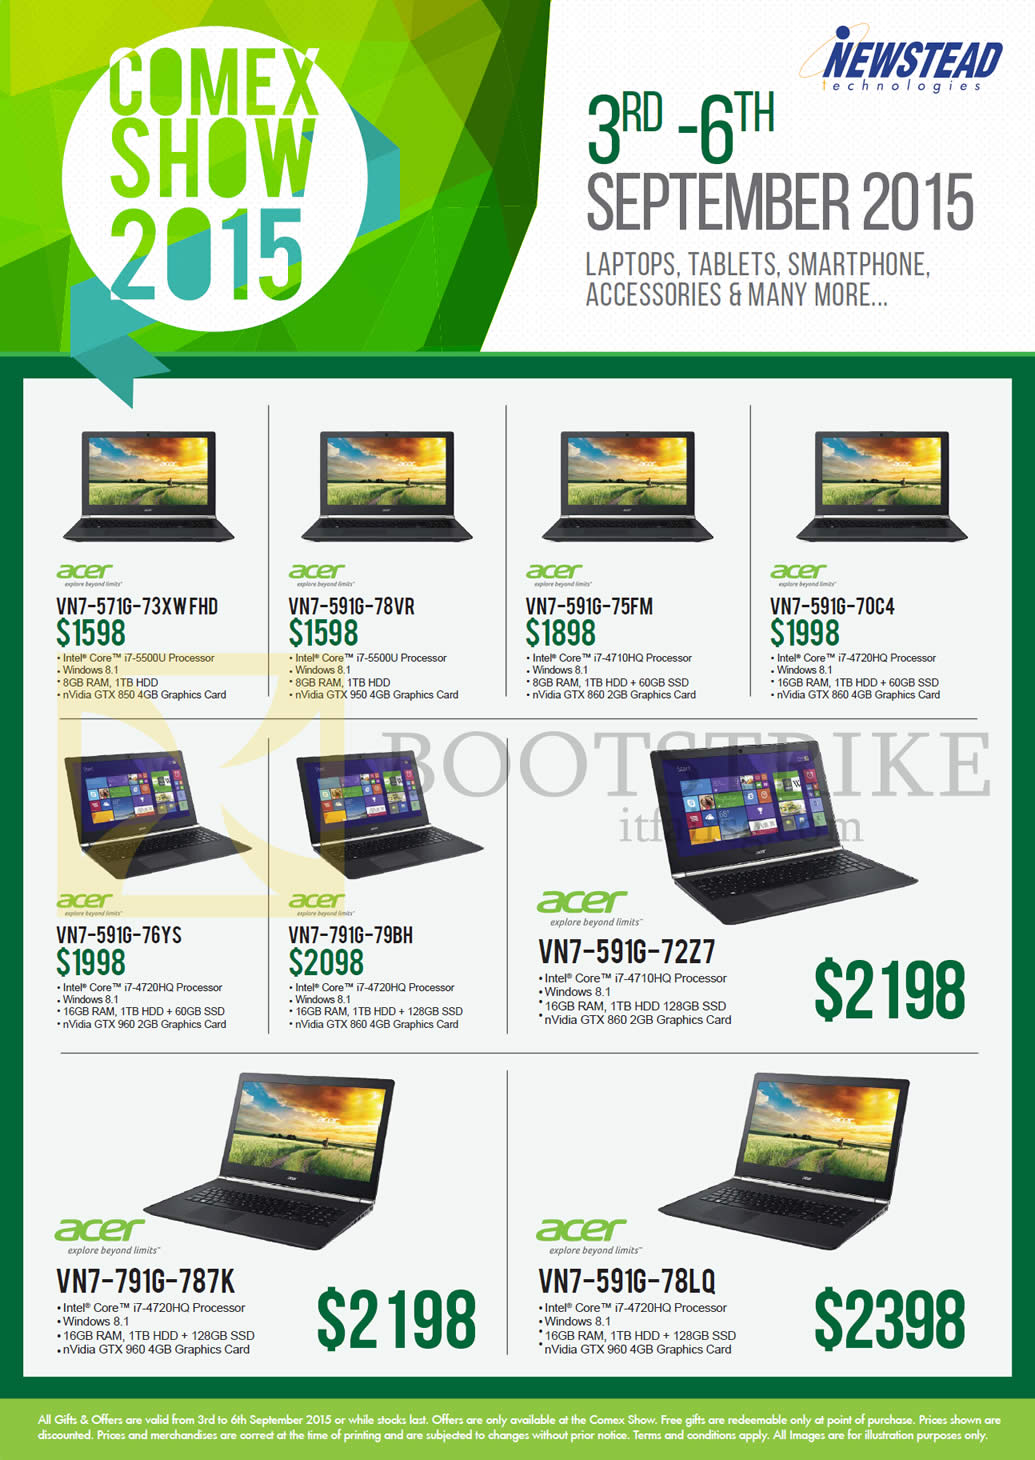 COMEX 2015 price list image brochure of Acer Newstead Notebooks VN7-571G, 591G, 791G